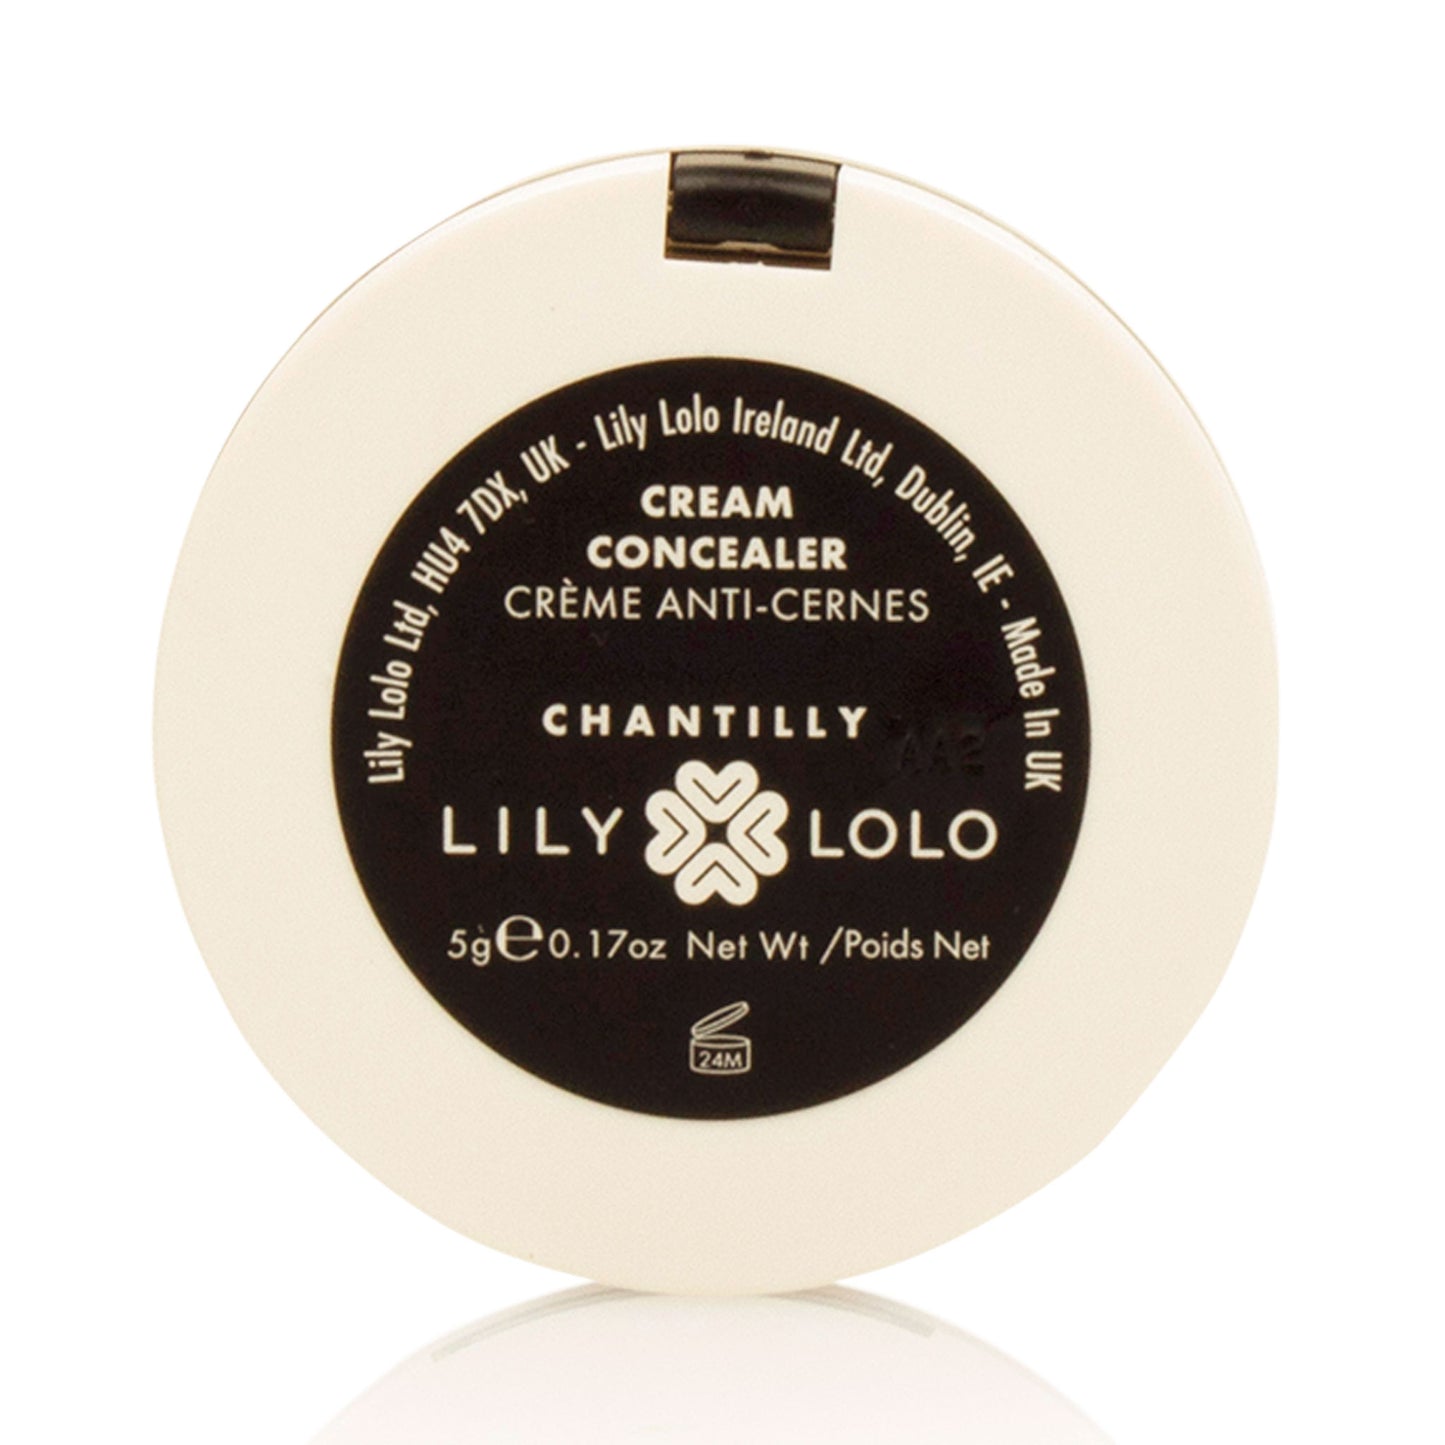 LILY LOLO CREAM CONCEALER CHANTILLY